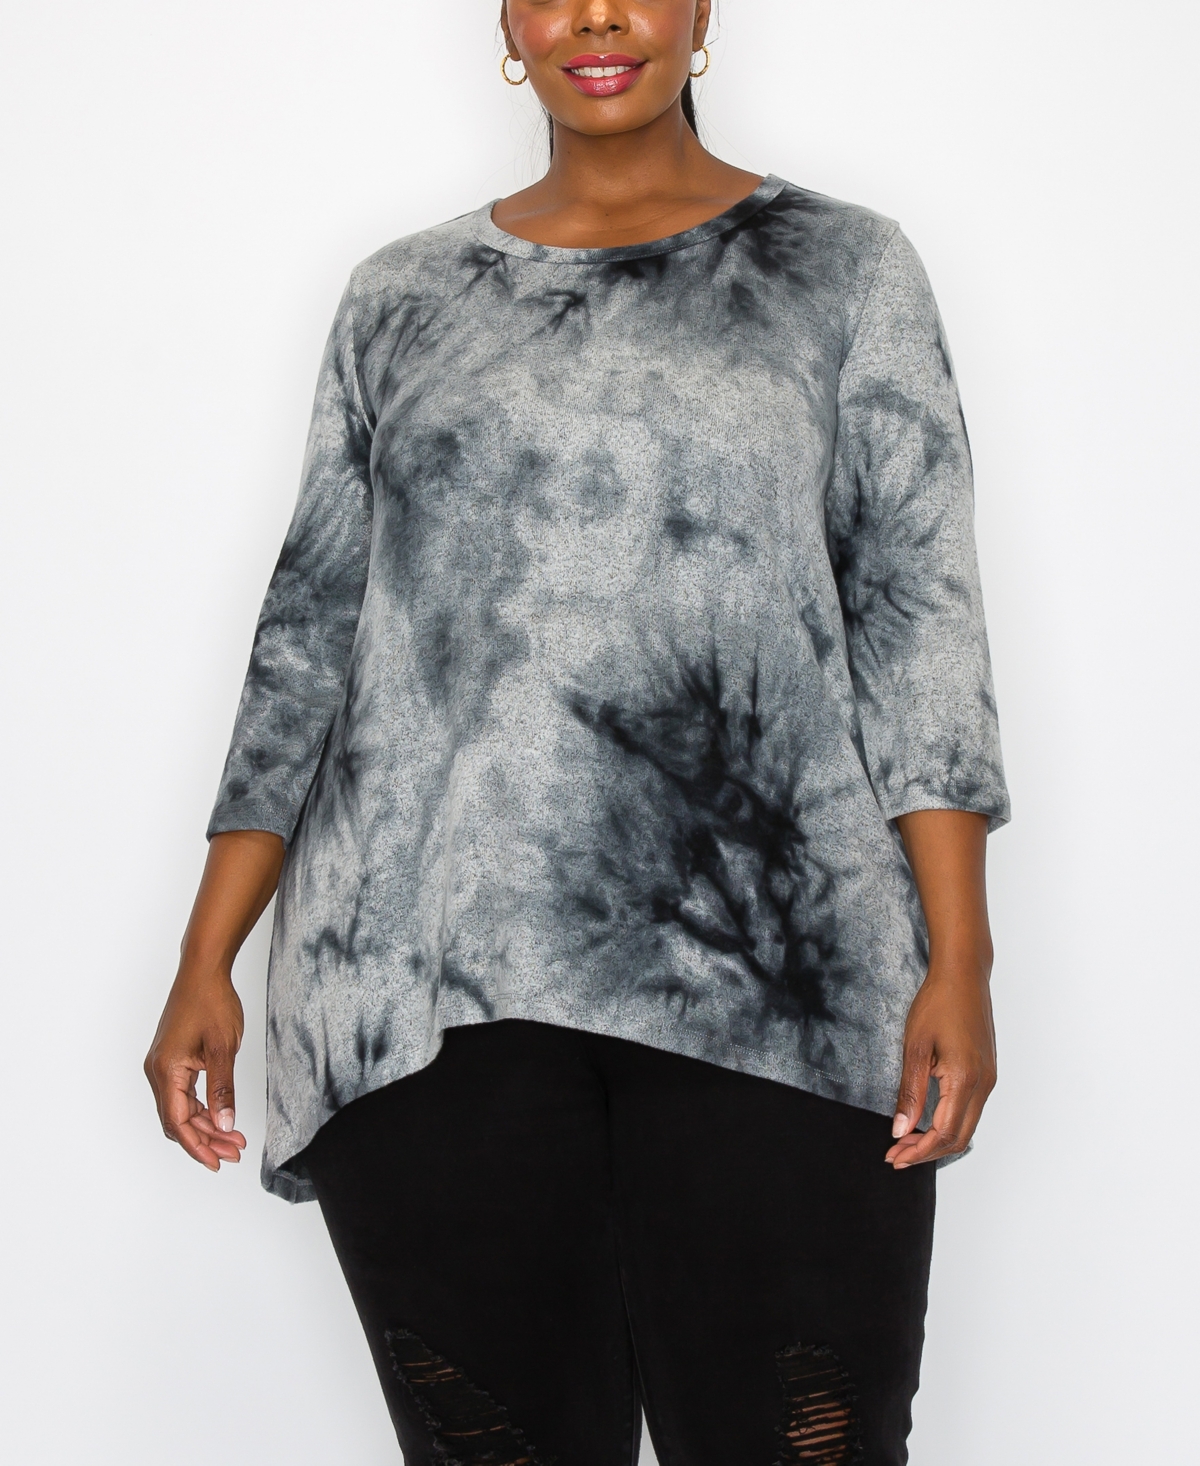 Coin 1804 Plus Size Tie Dye Cozy 3/4 Sleeve Button Back Top In Gray Black